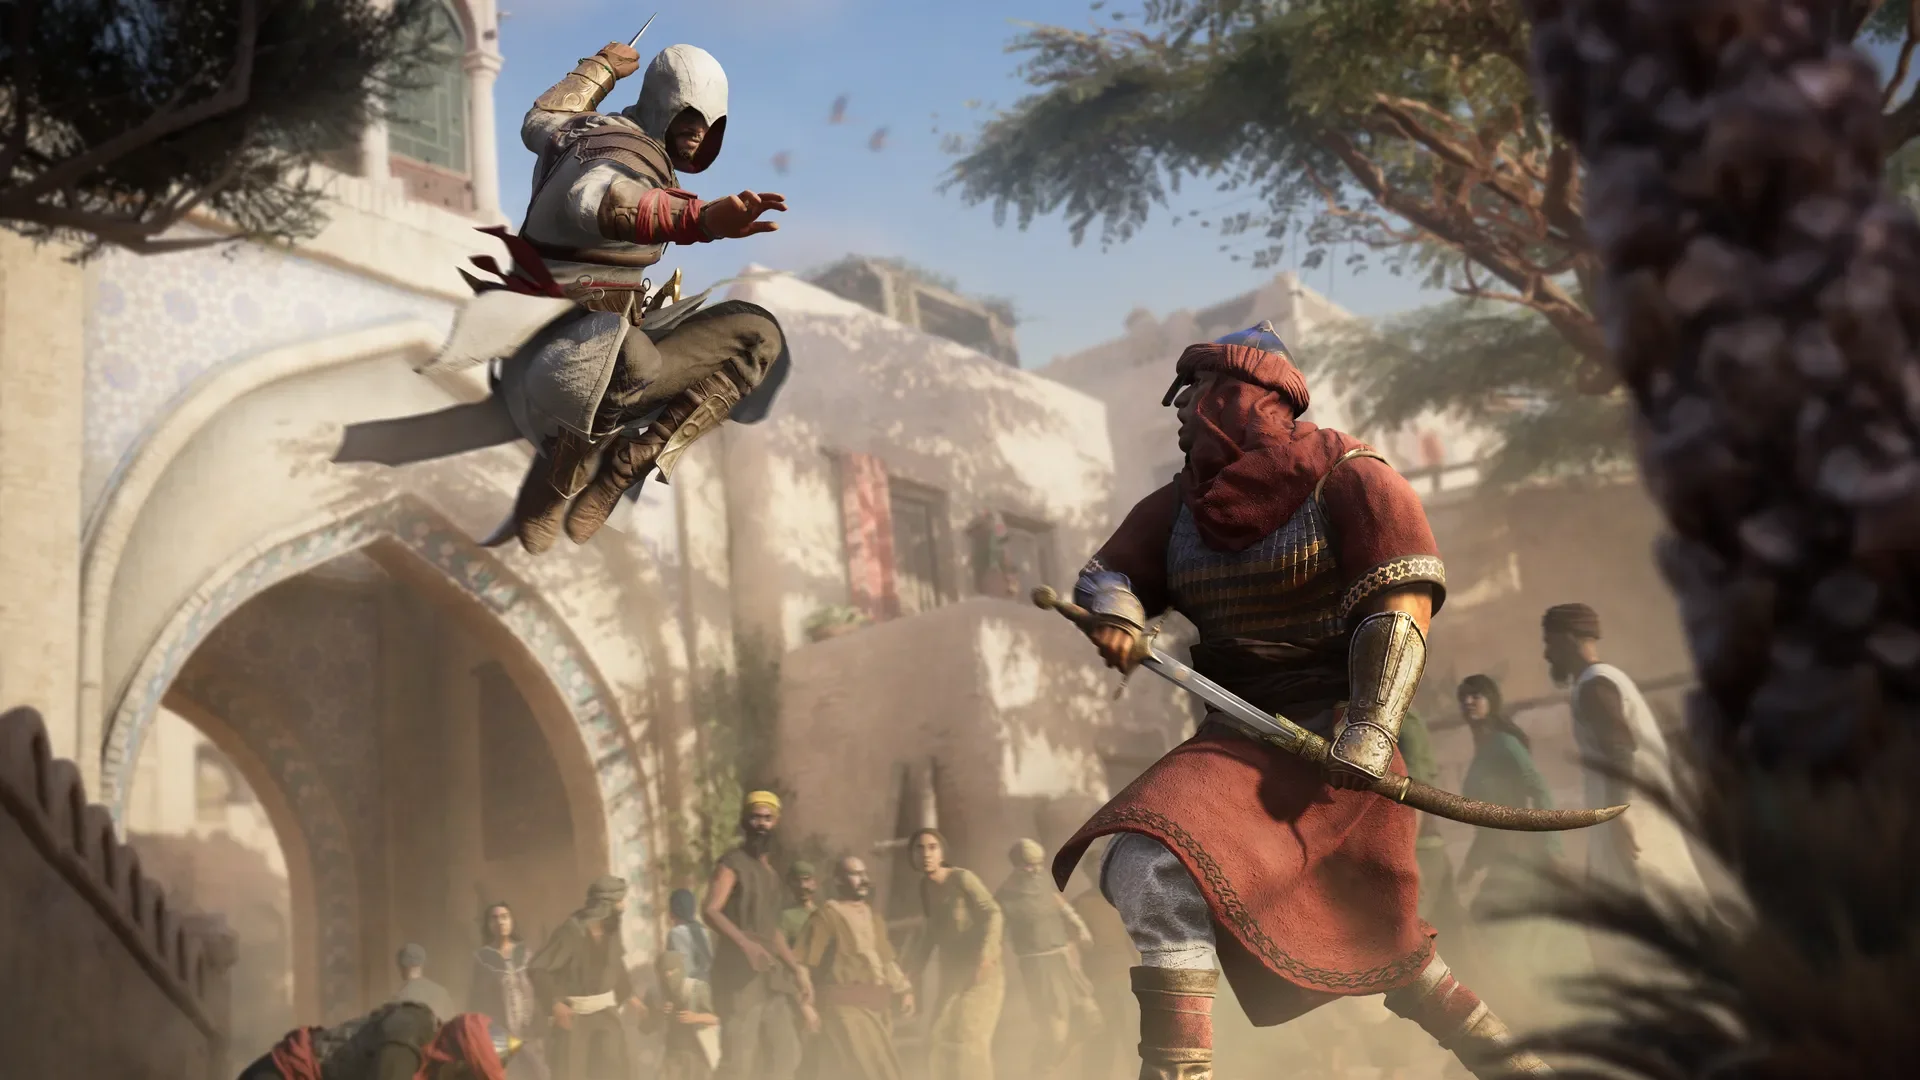 System requirements and trailer for the PC version of Assassin's Creed: Mirage have appeared